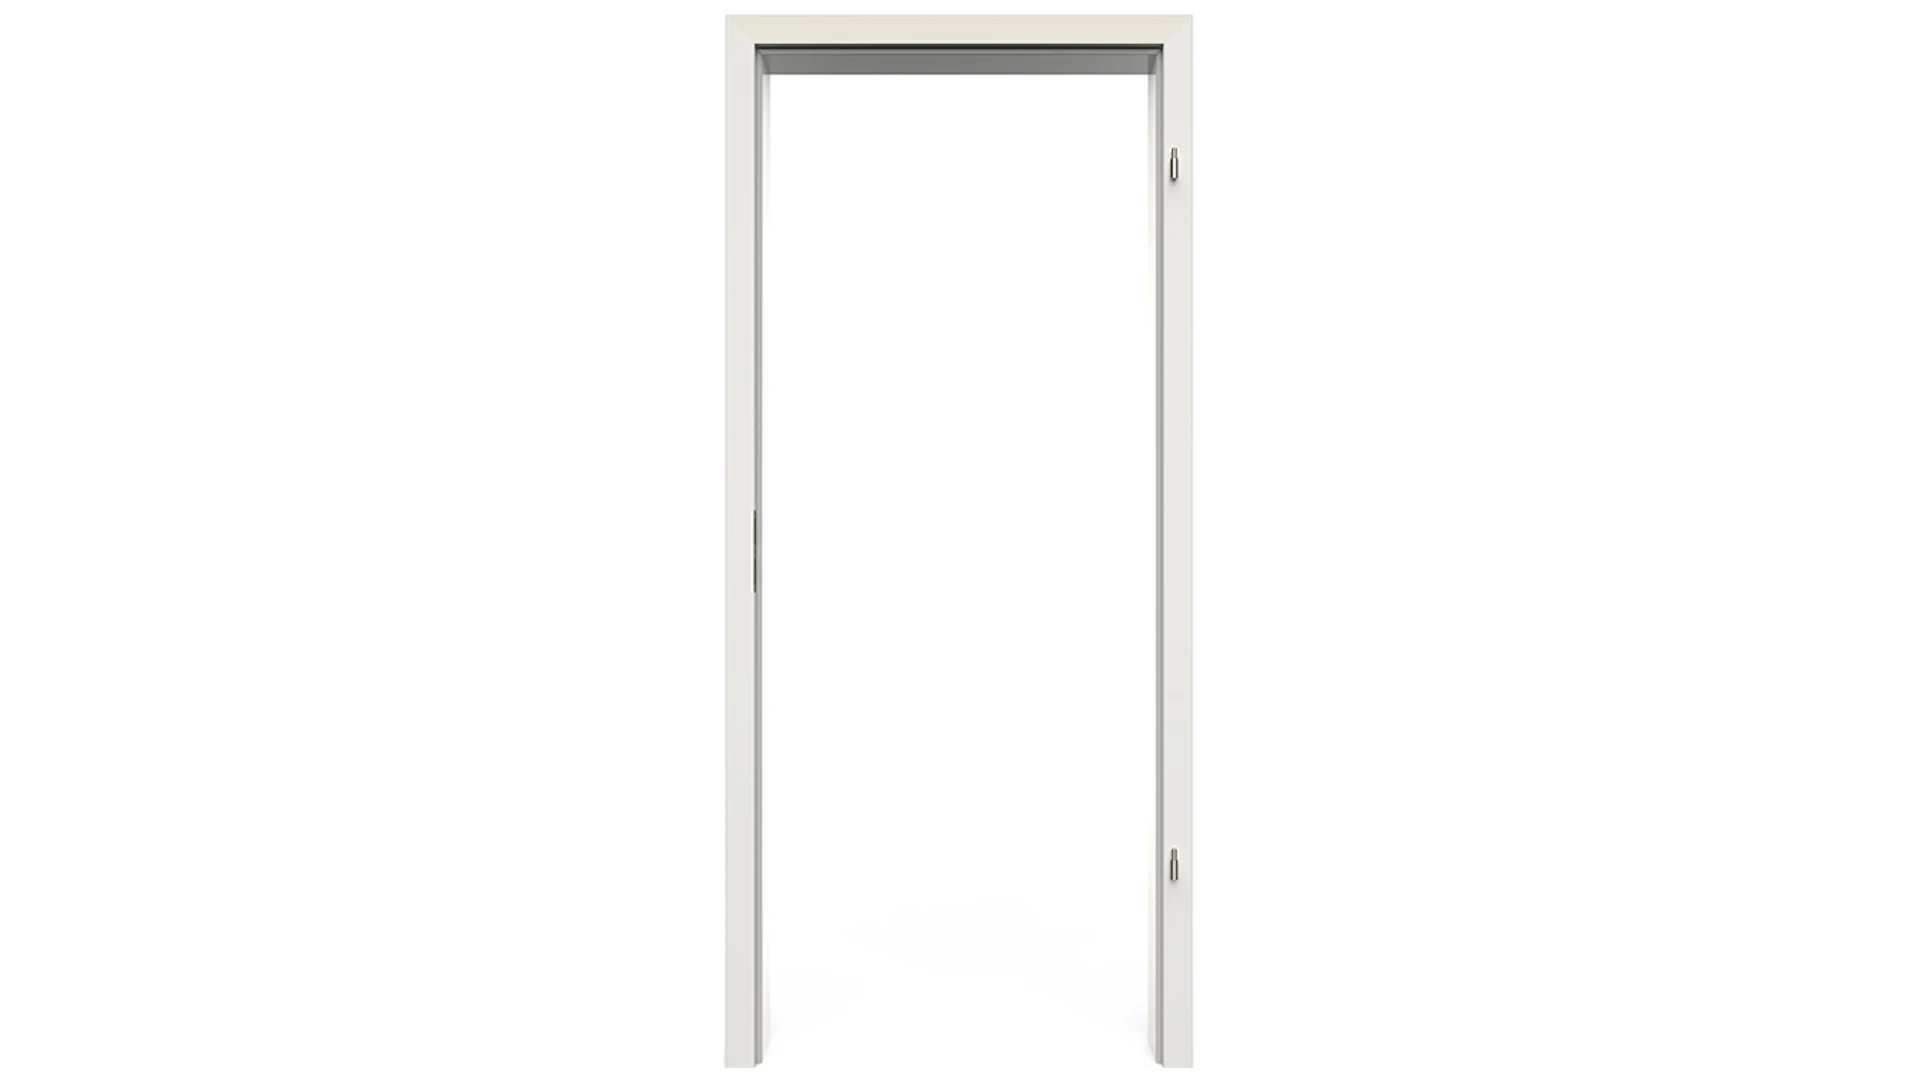 planeo Standard Door frame, rounded edge - CPL White 9010 - 2110 x 610 x 270 mm DIN right